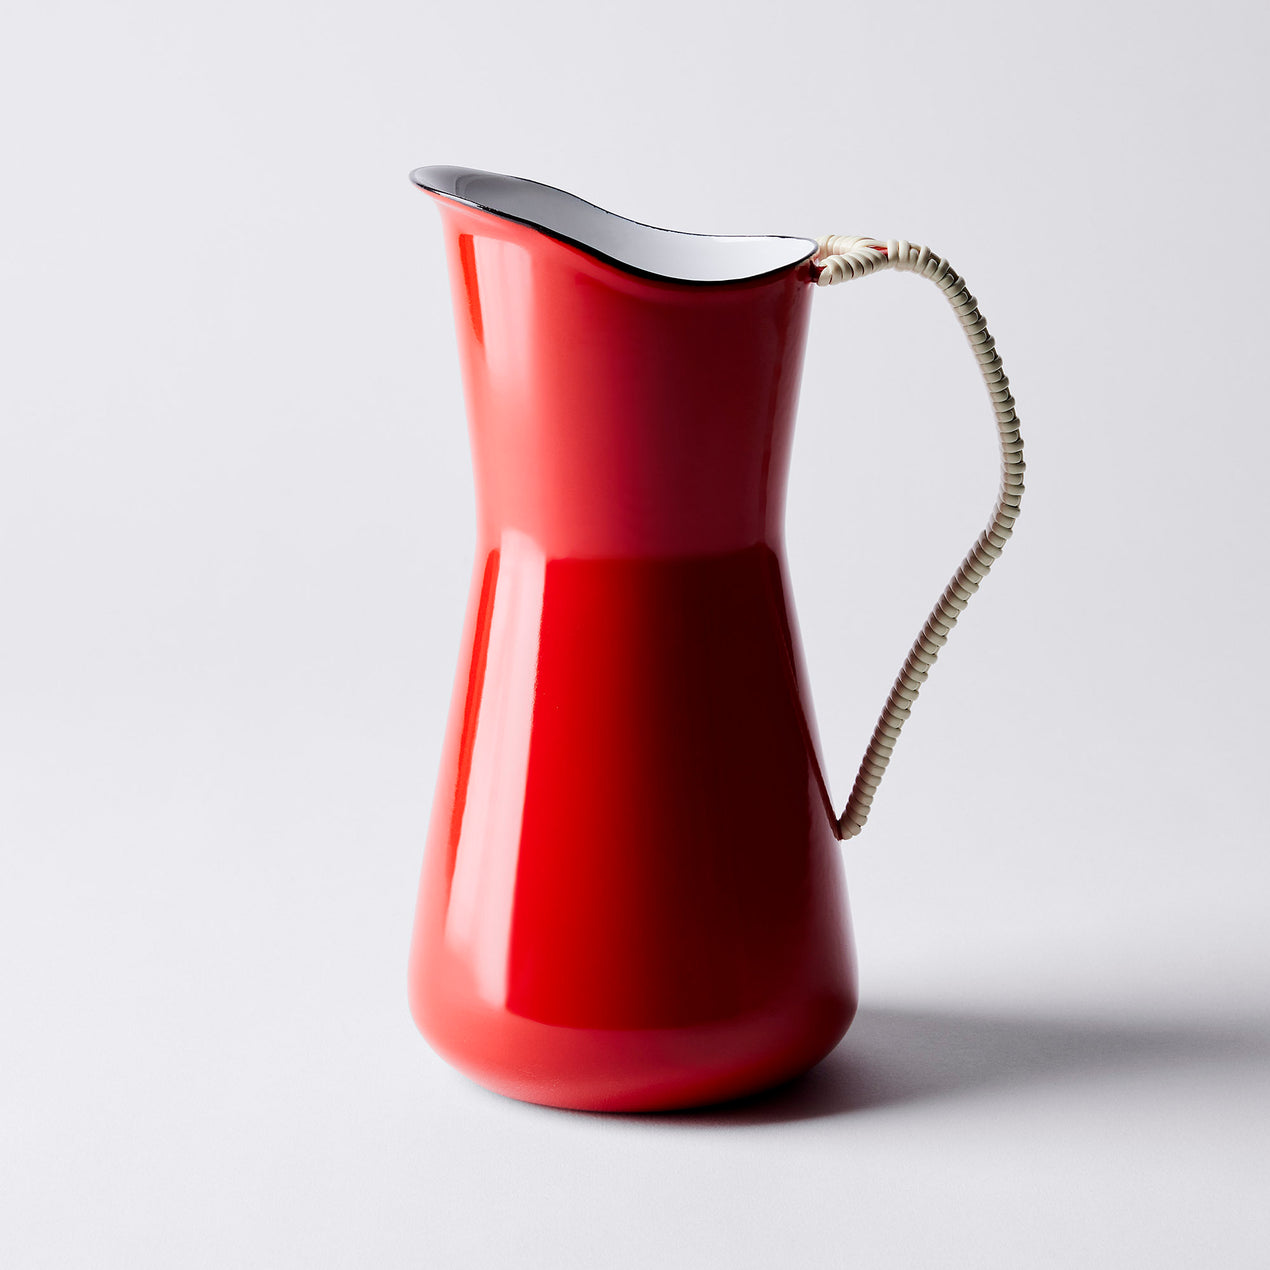 Købenstyle Wrapped Handle Water Pitcher, Chili Red